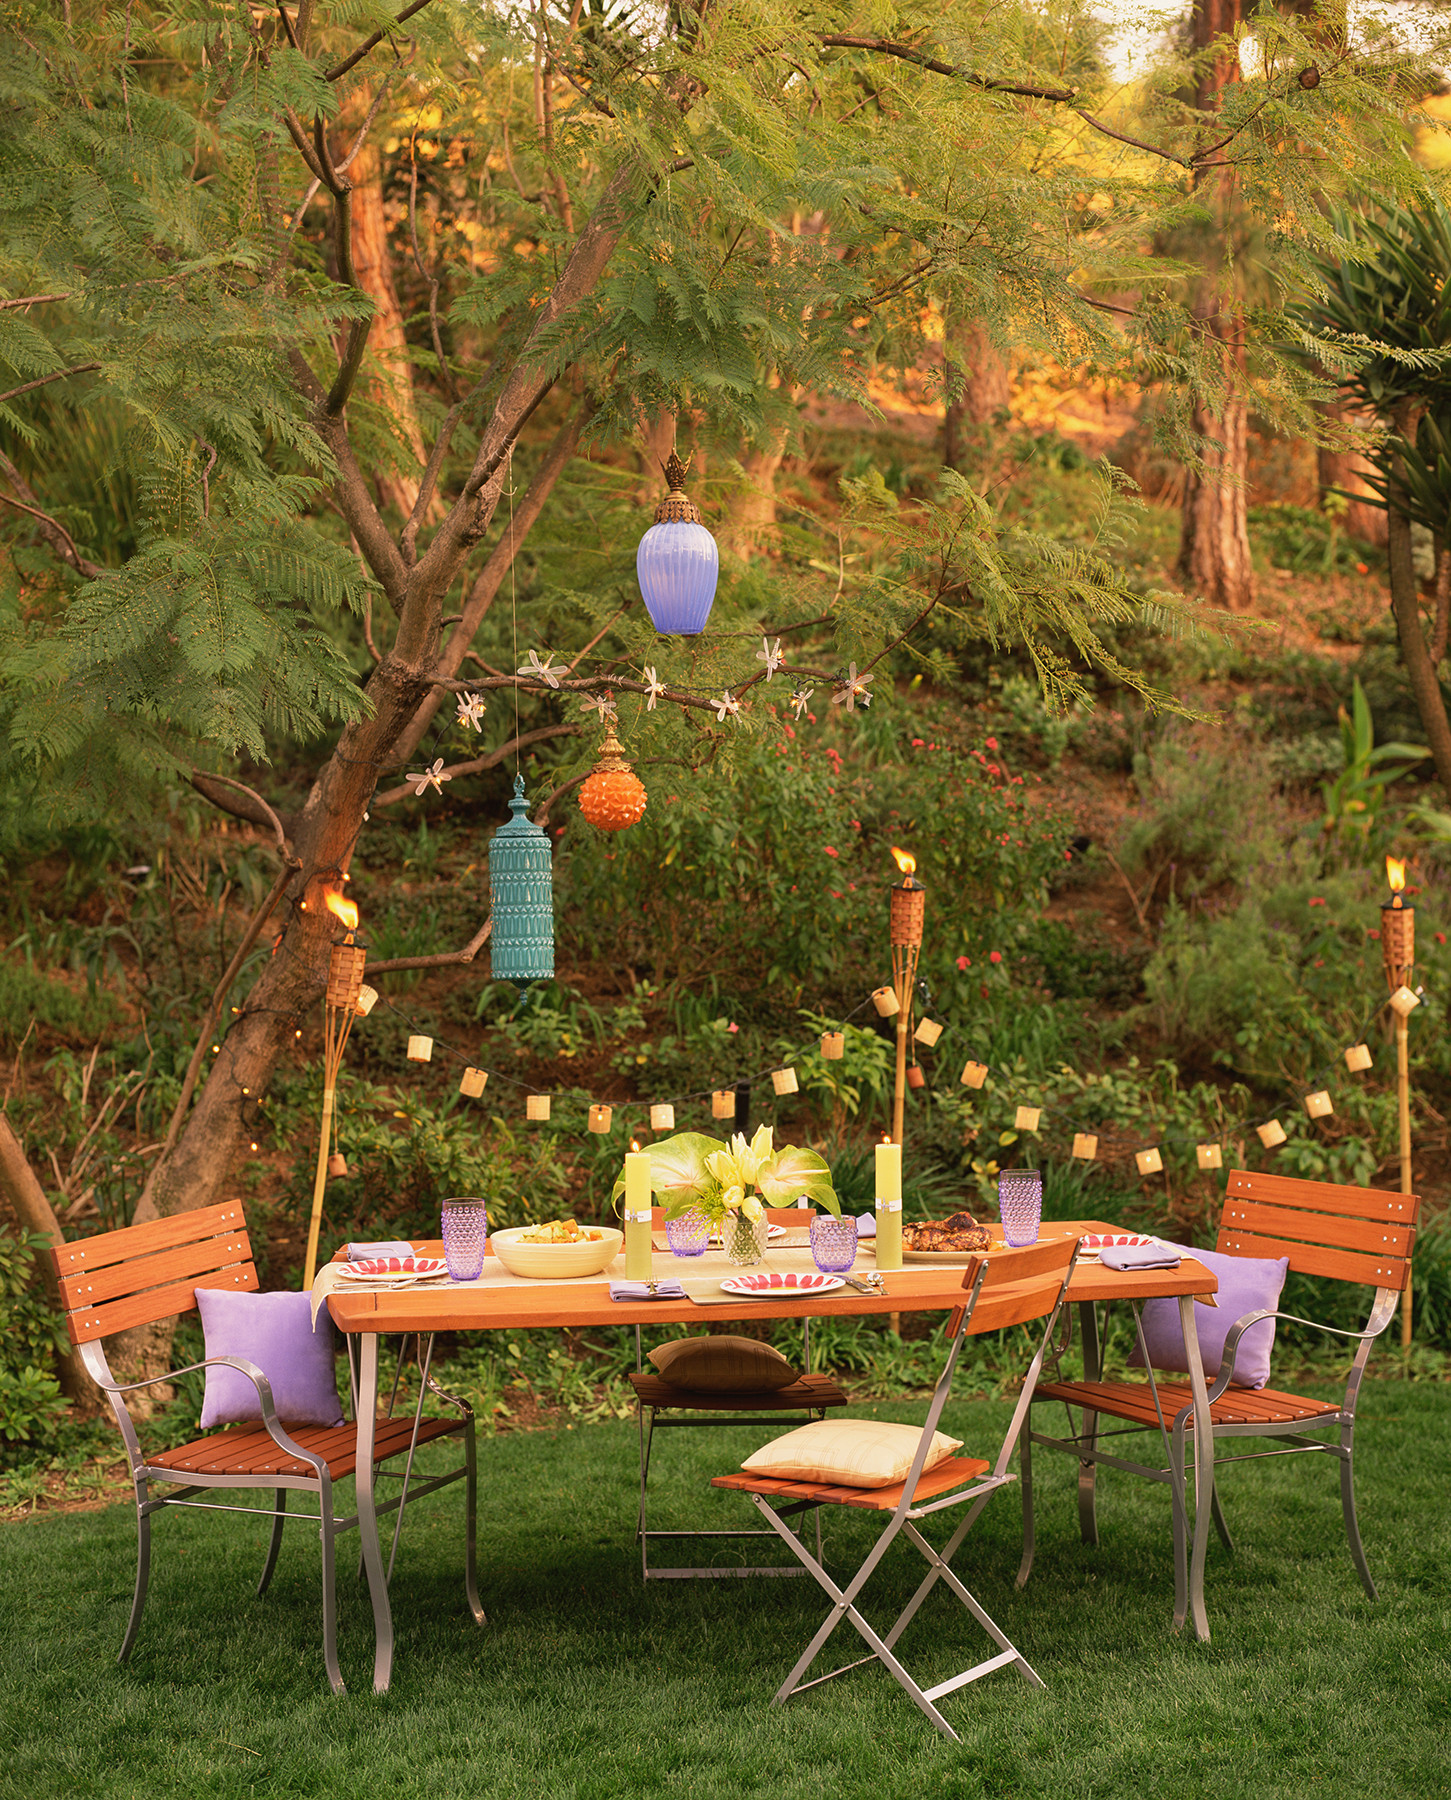 Lighting Ideas For Backyard Party
 17 Outdoor Party Ideas for an Effortless Backyard